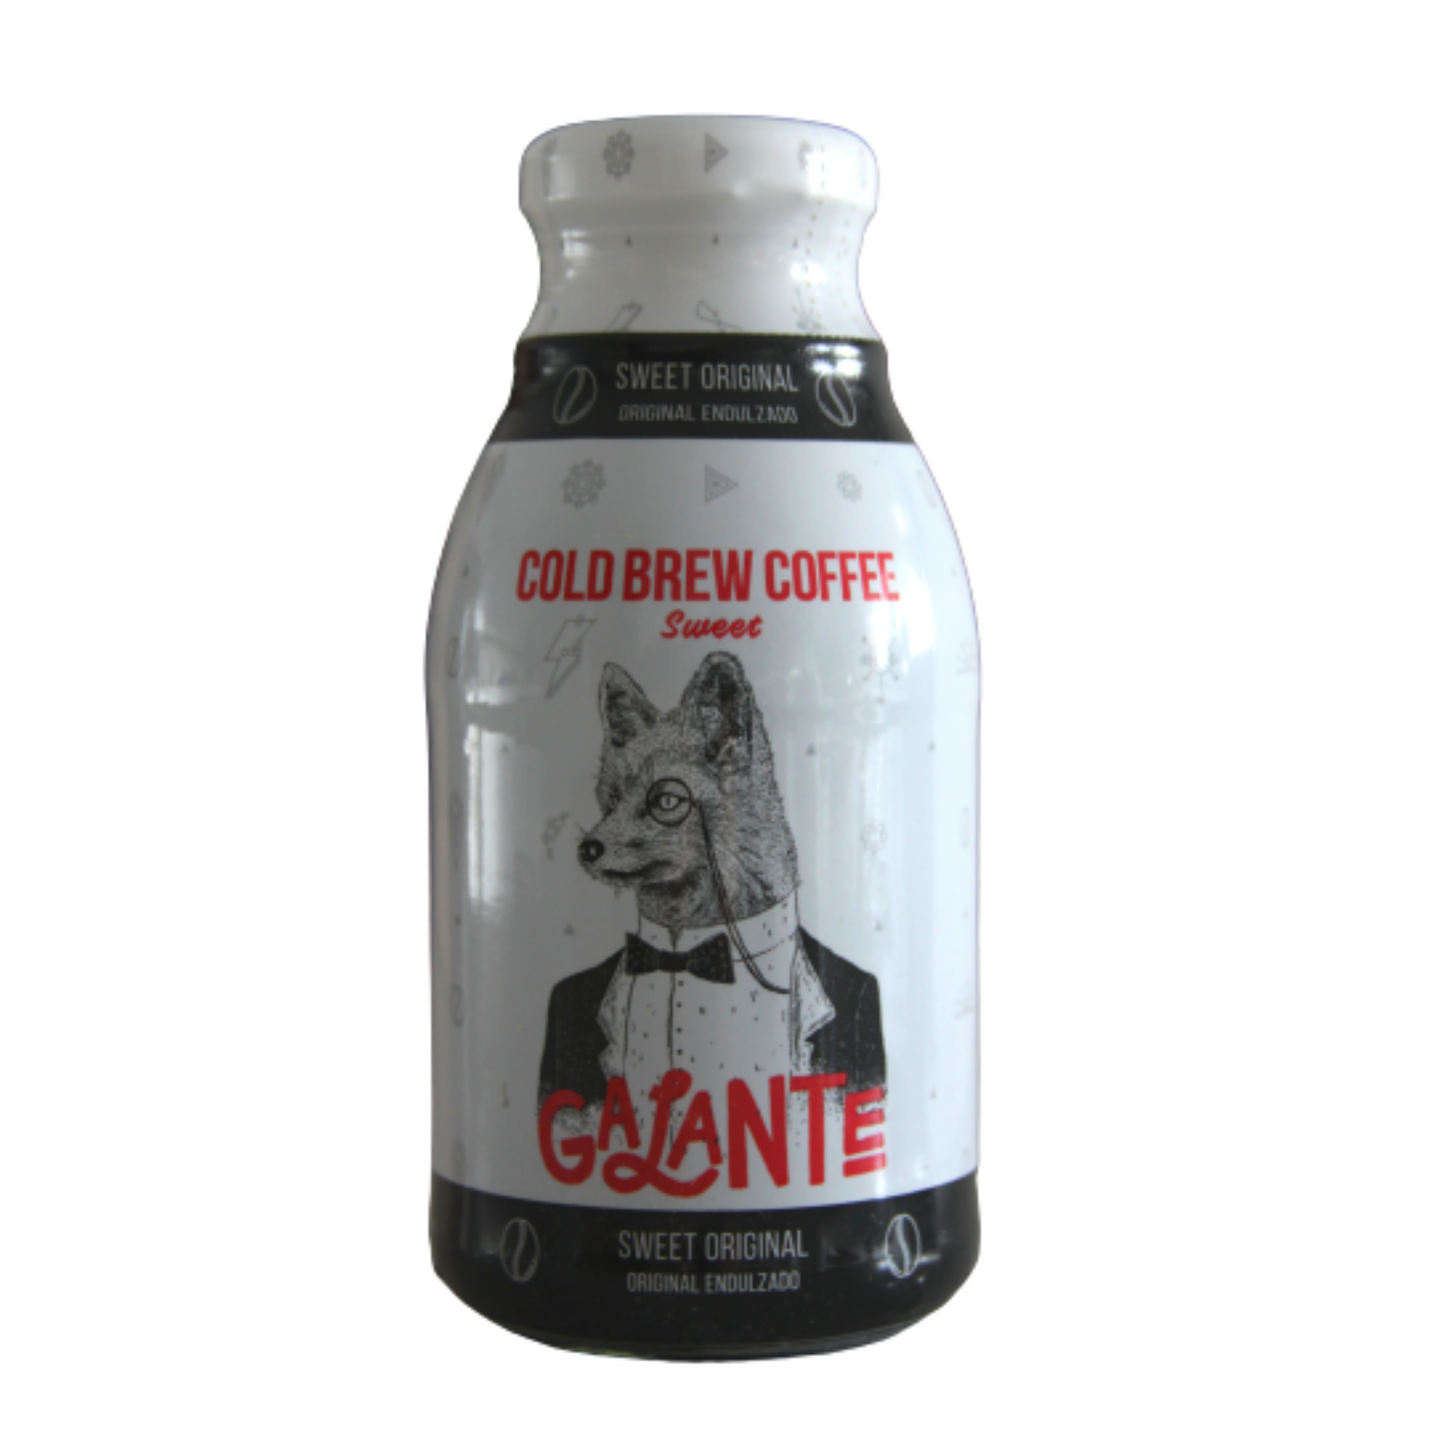 Galante Original Sweet Cold Brew - 100% Colombian Coffee. Buy it here at Coffee Bean and Birds